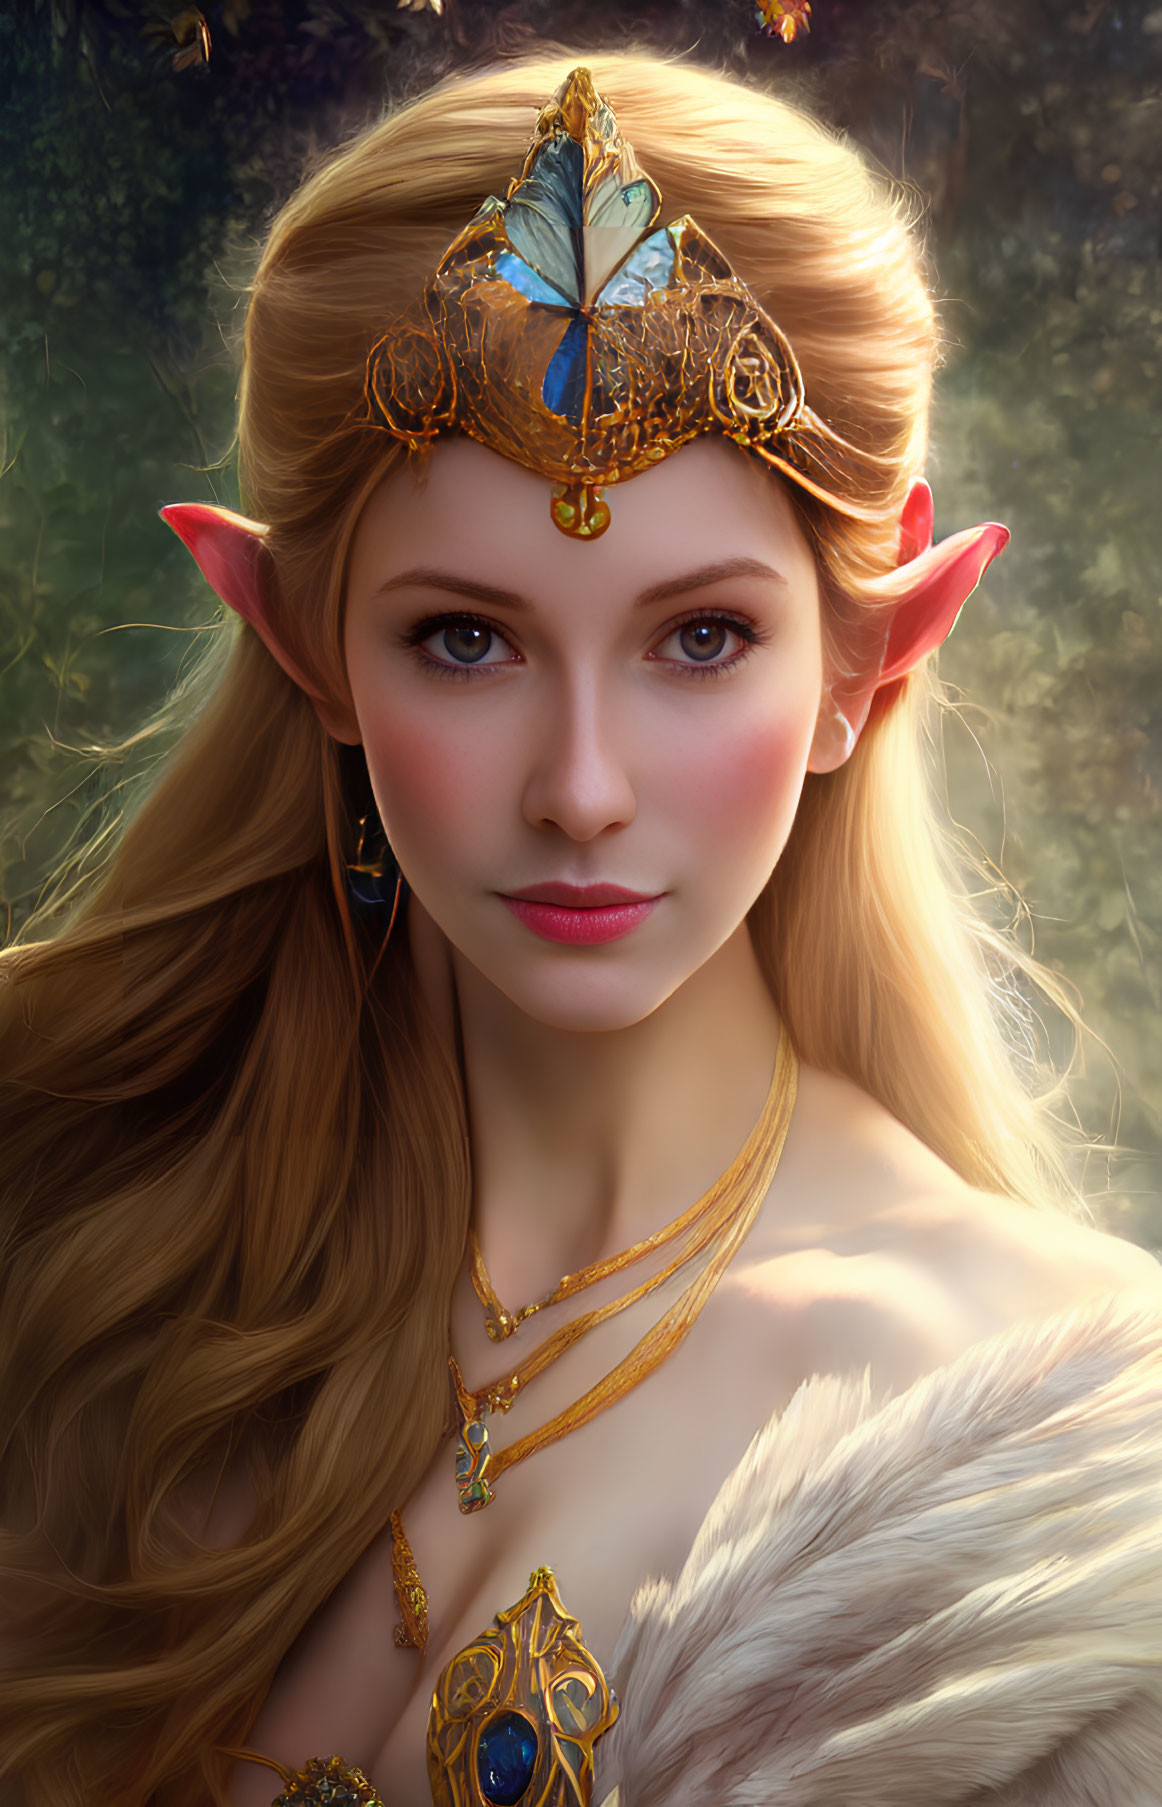 Blonde Elf Woman with Crown and Butterfly Jewelry in Nature